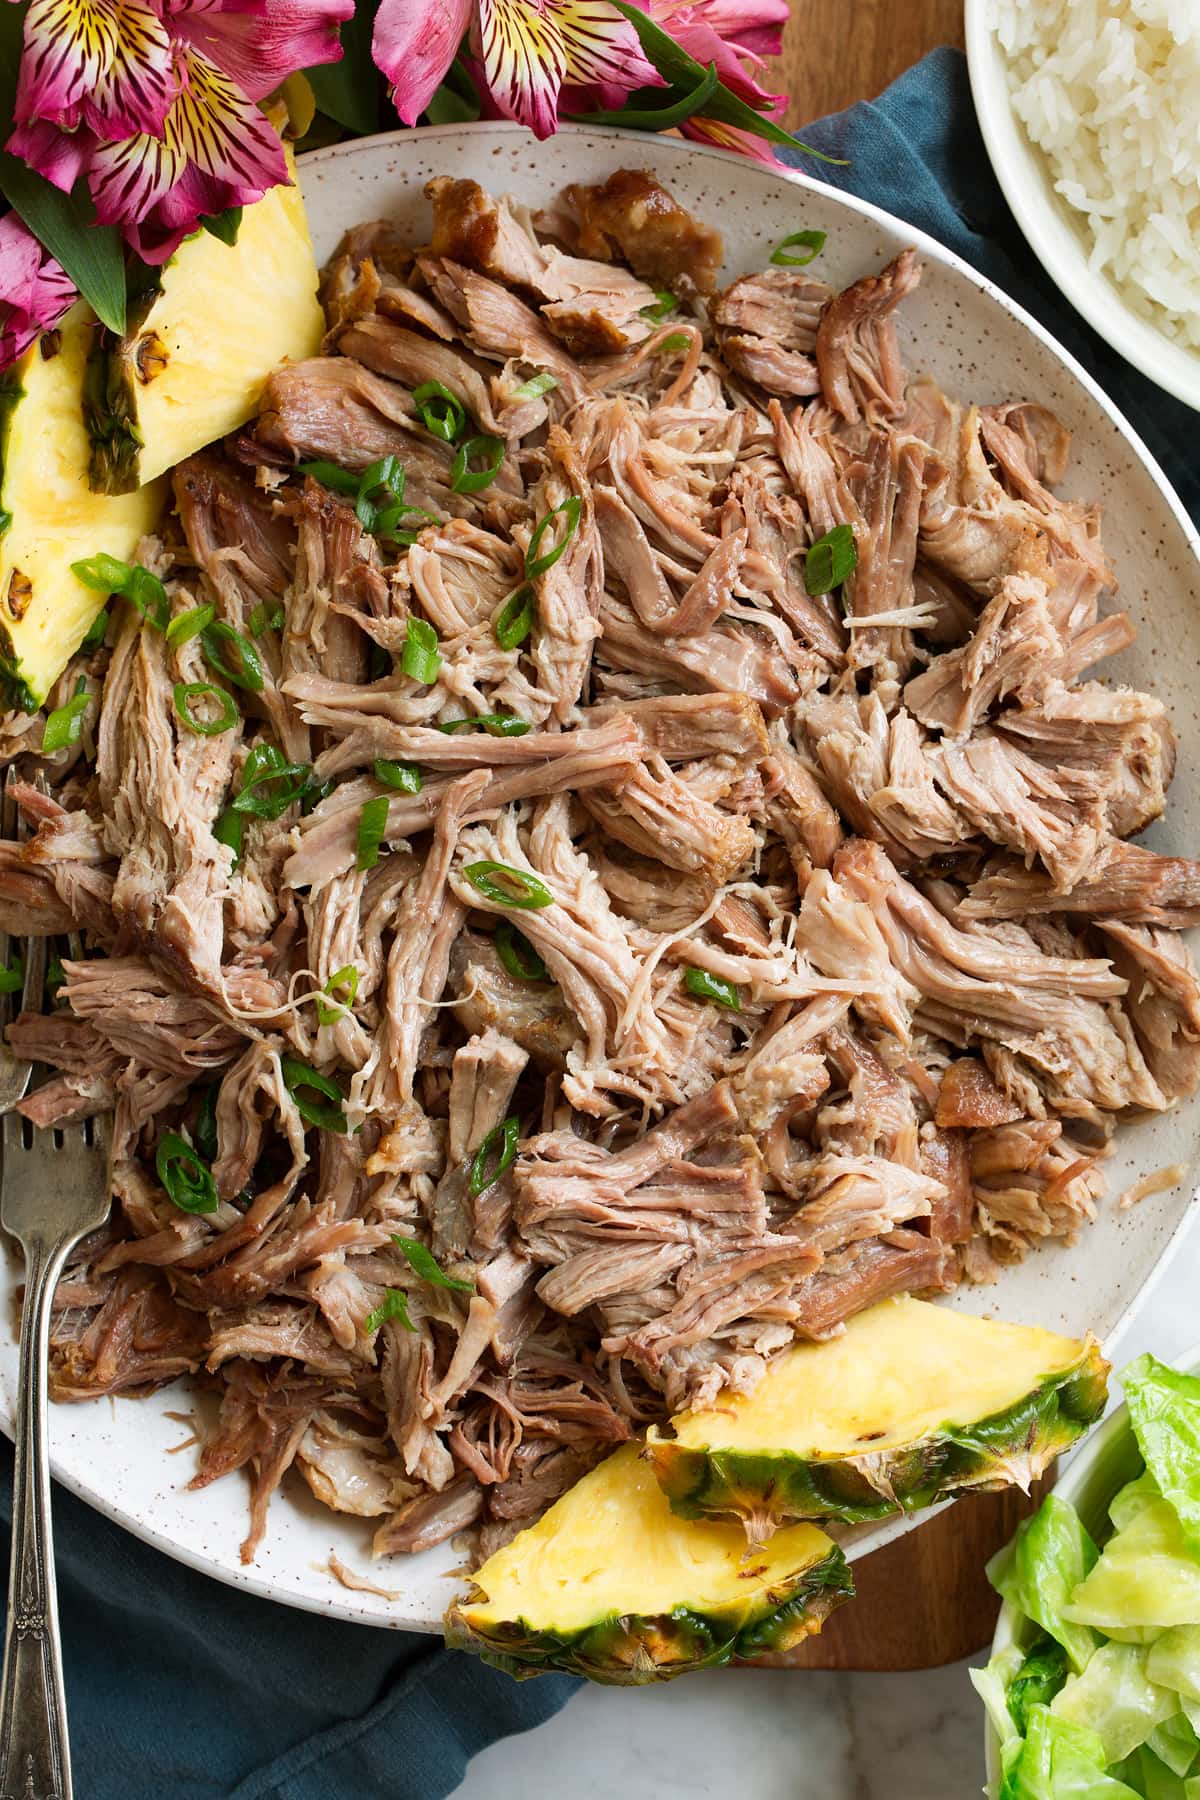 Overhead image of shredded Kalua pork in a white serving bowl with pineapple. It is garnished with sliced green onions.